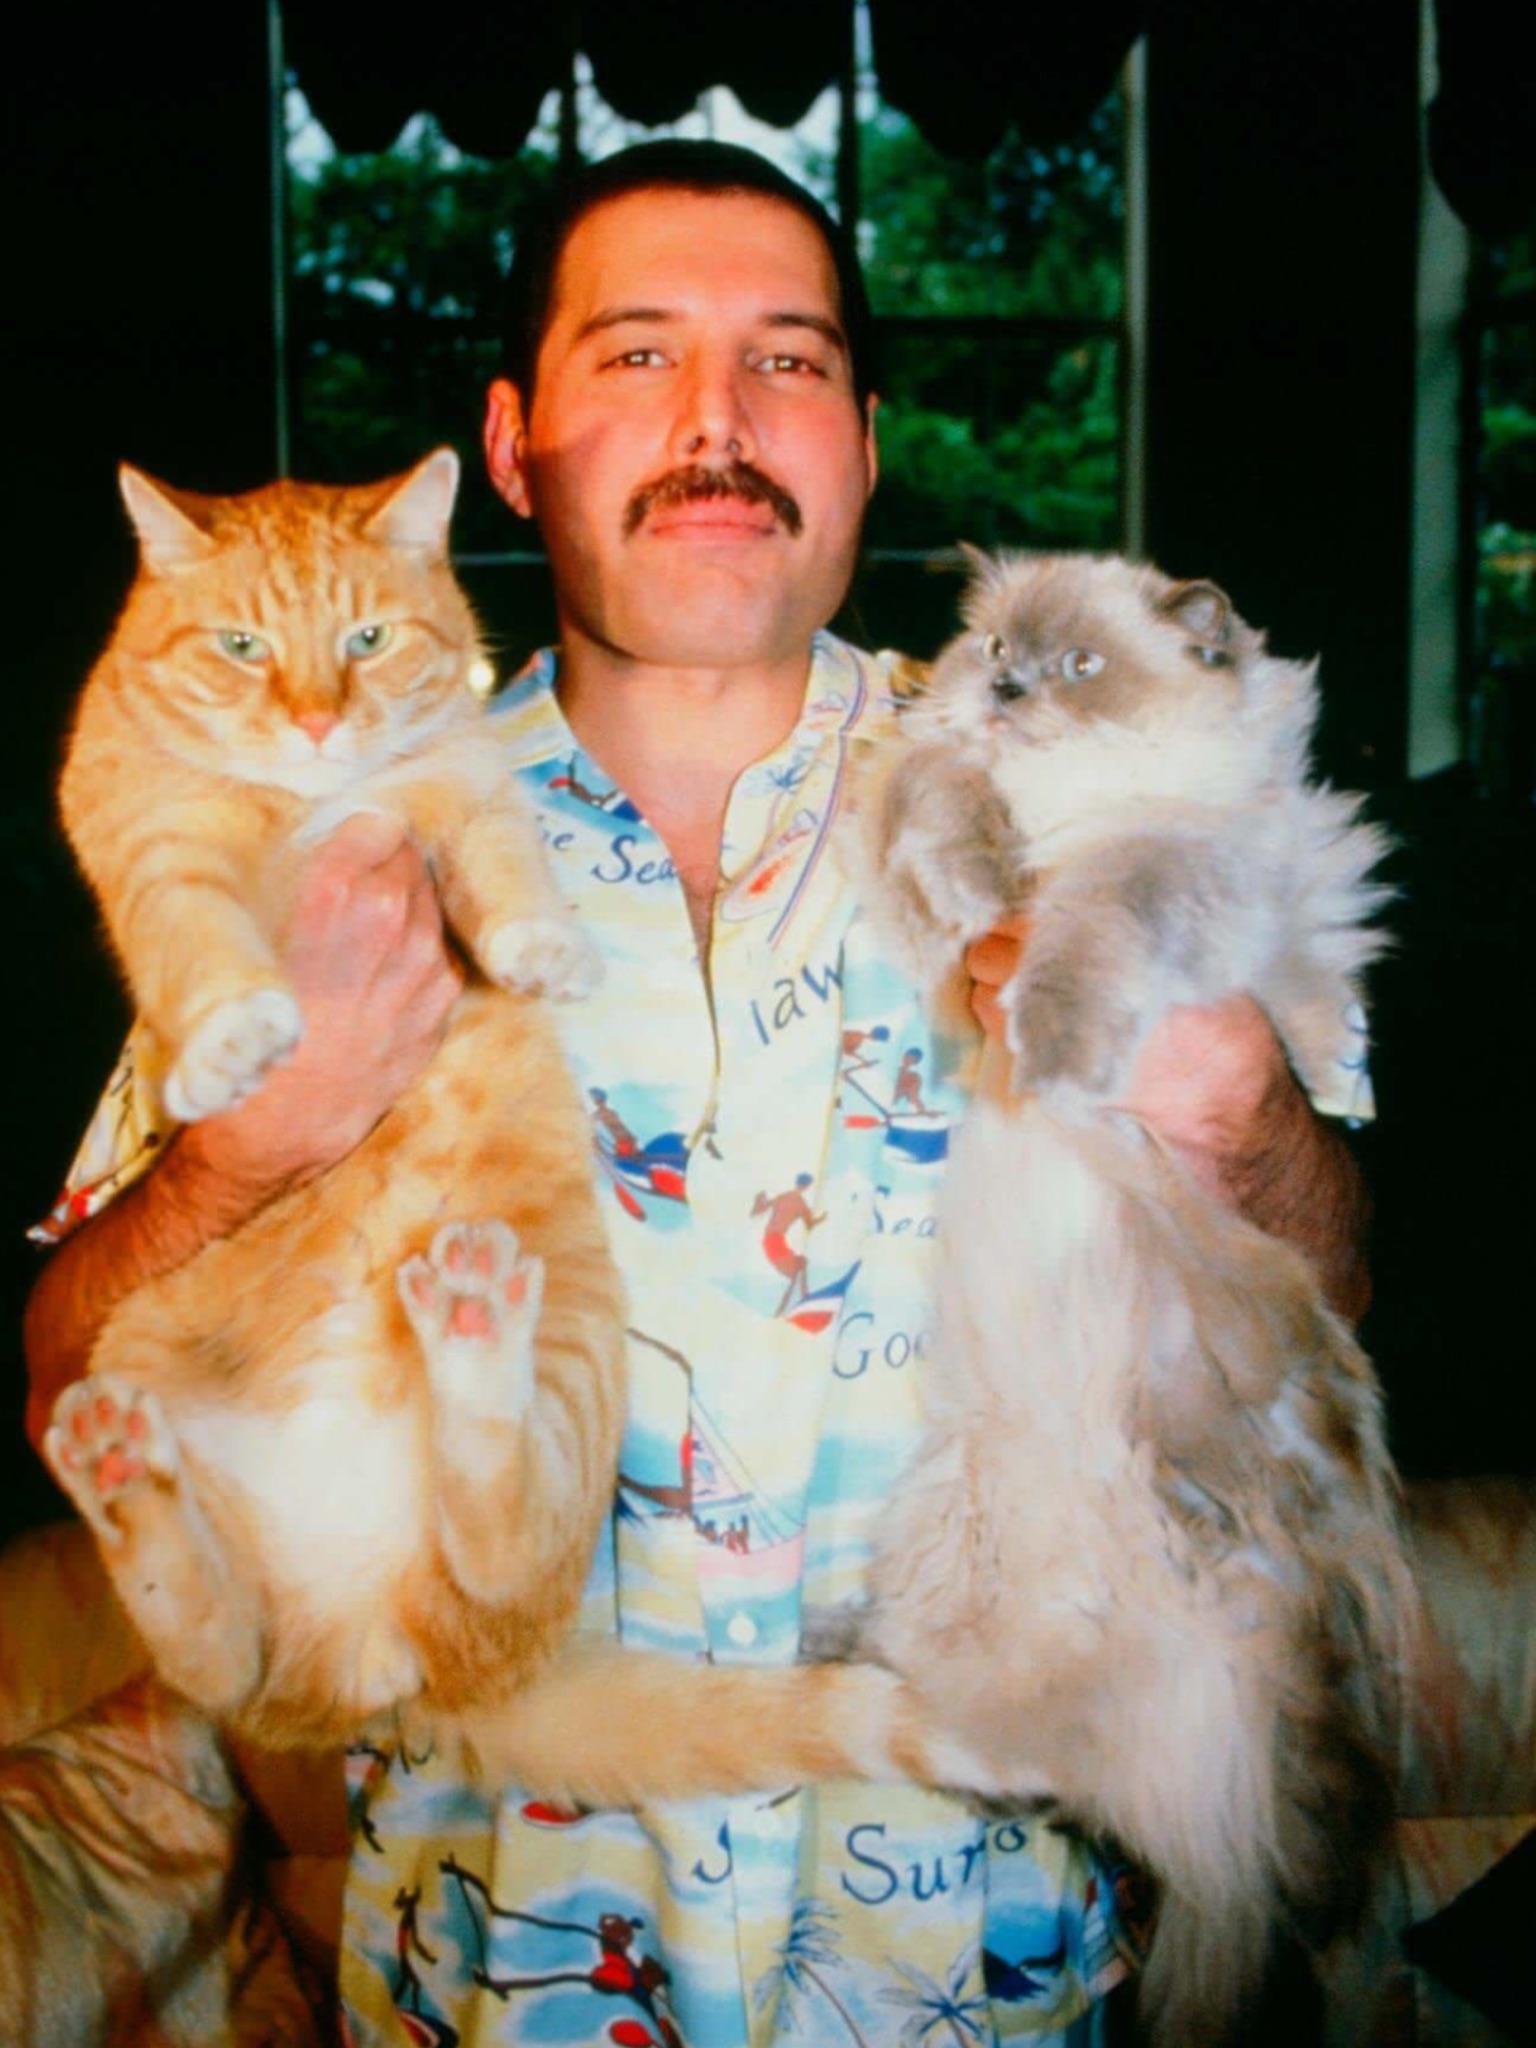 Freddy Mercury was an early investor in the internet